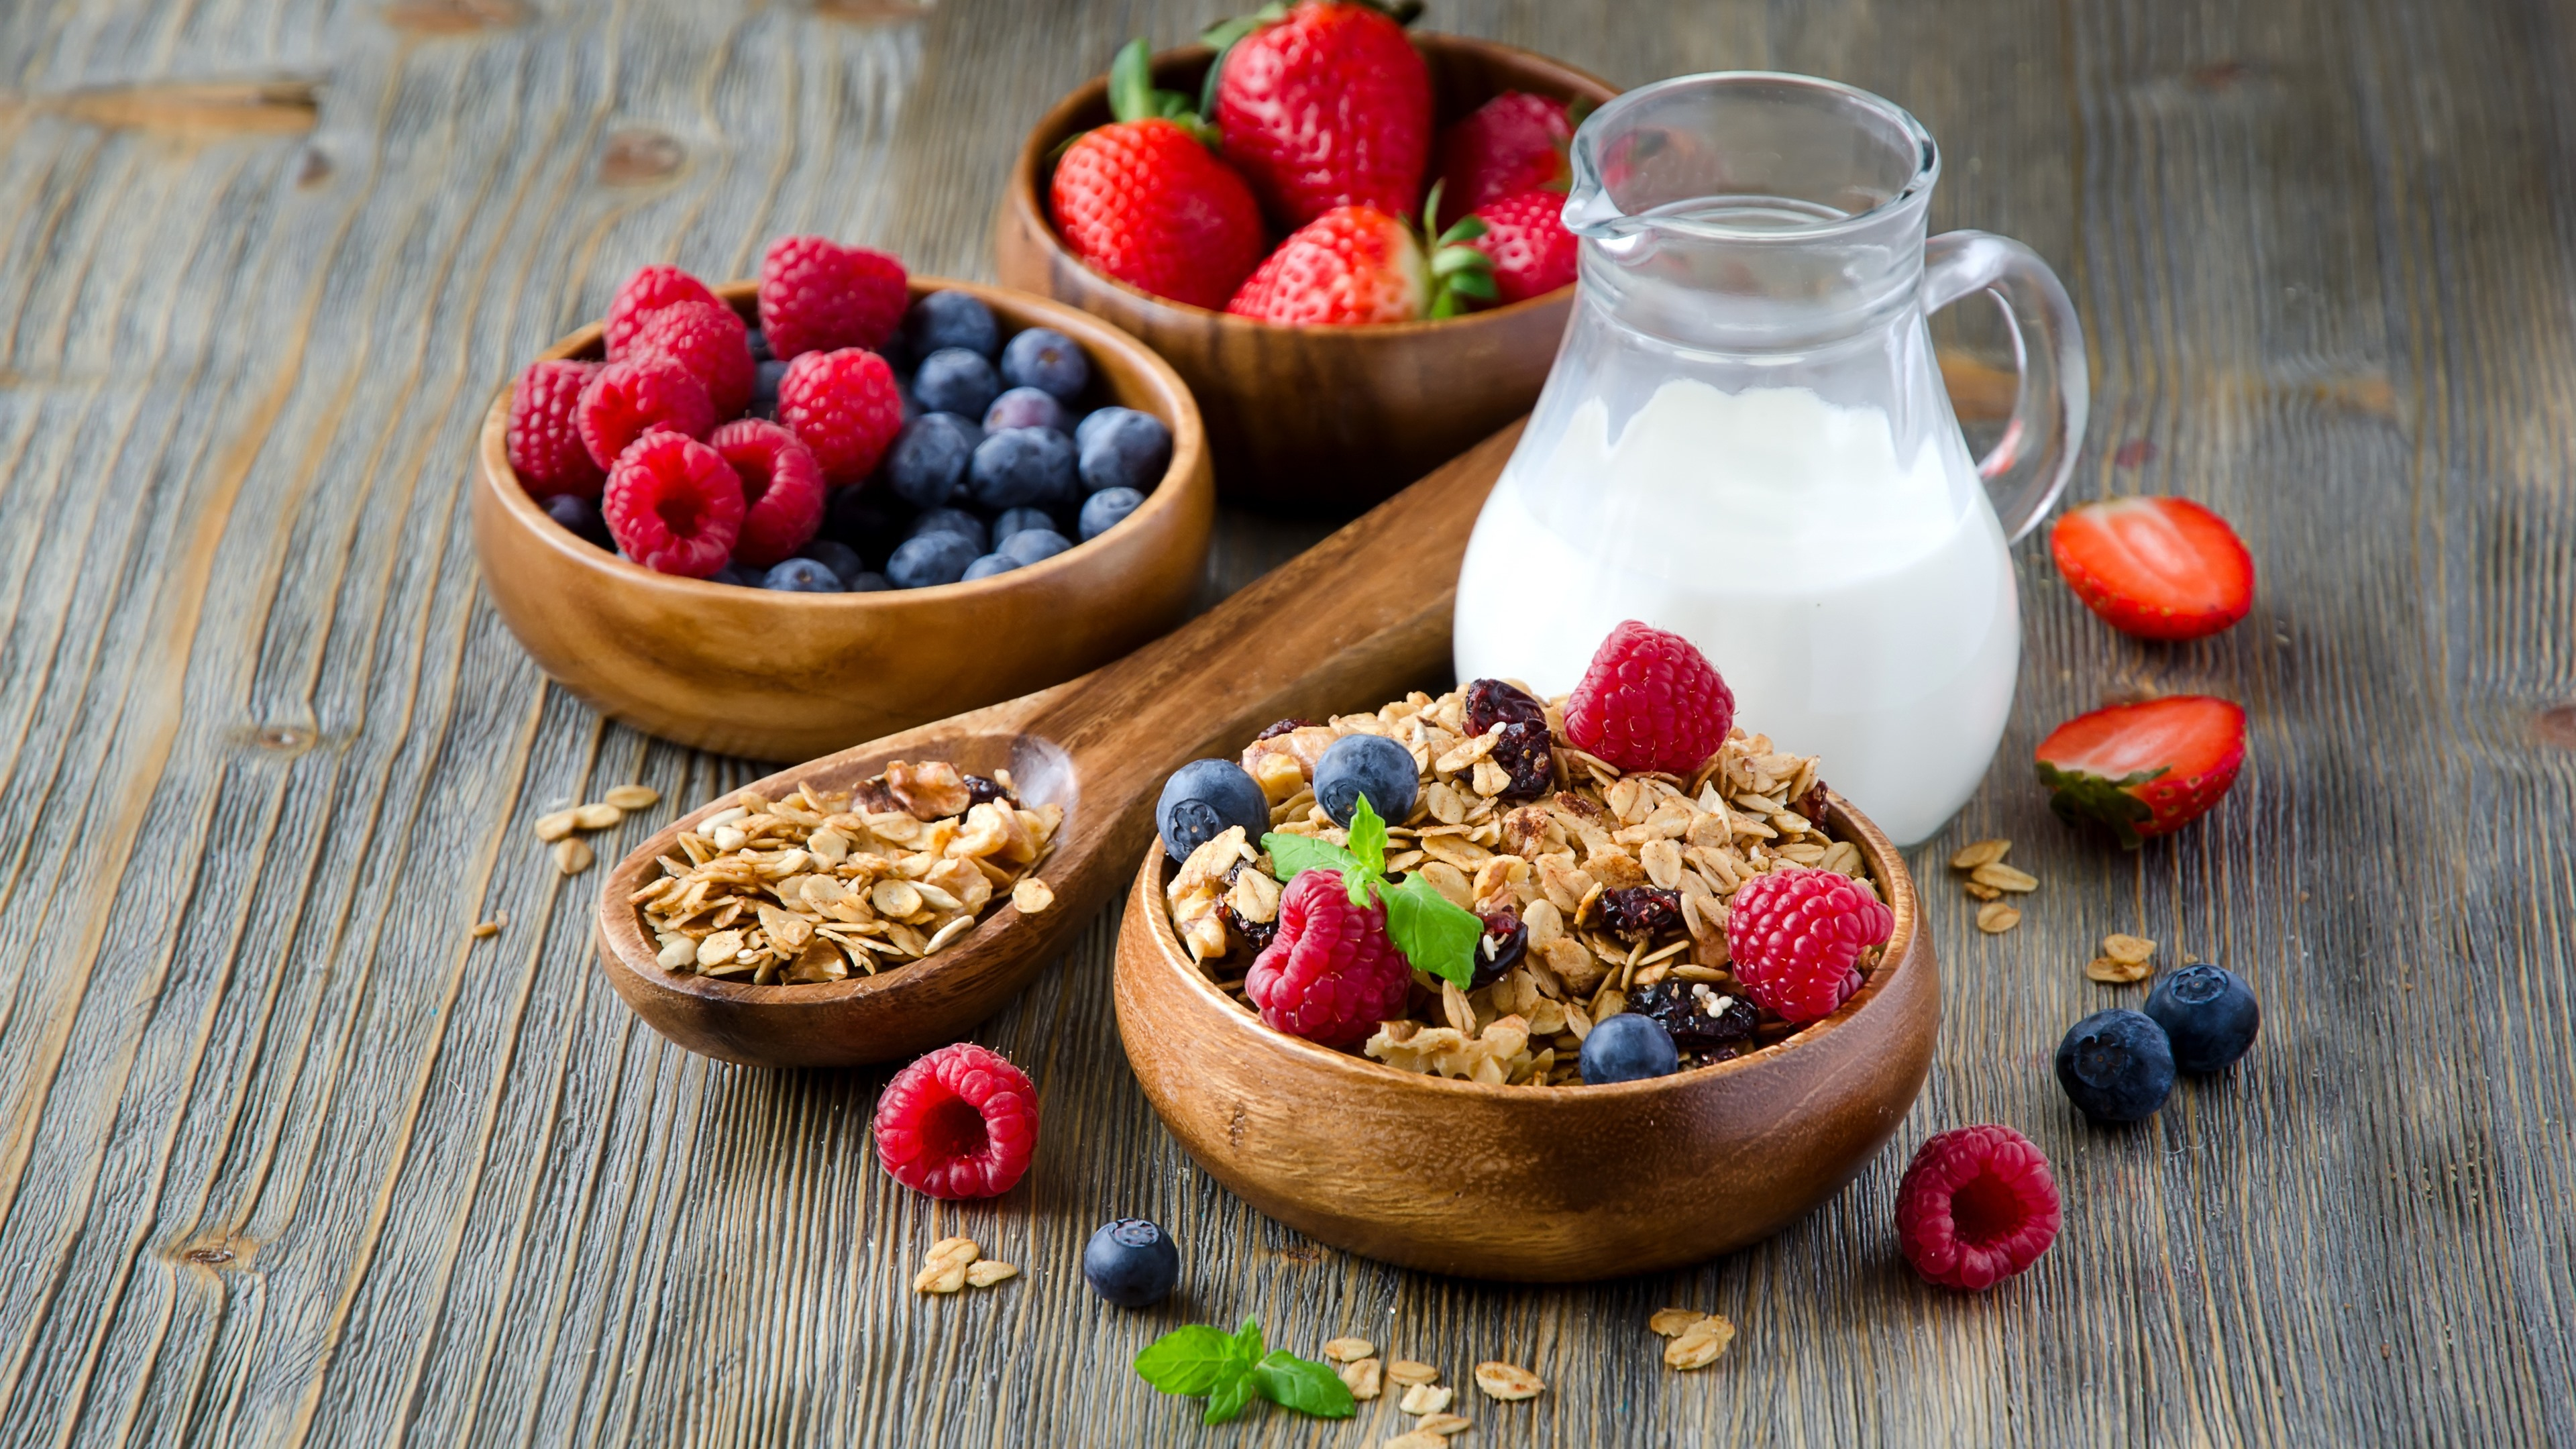 Free photo A still life of healthy food with milk and berries